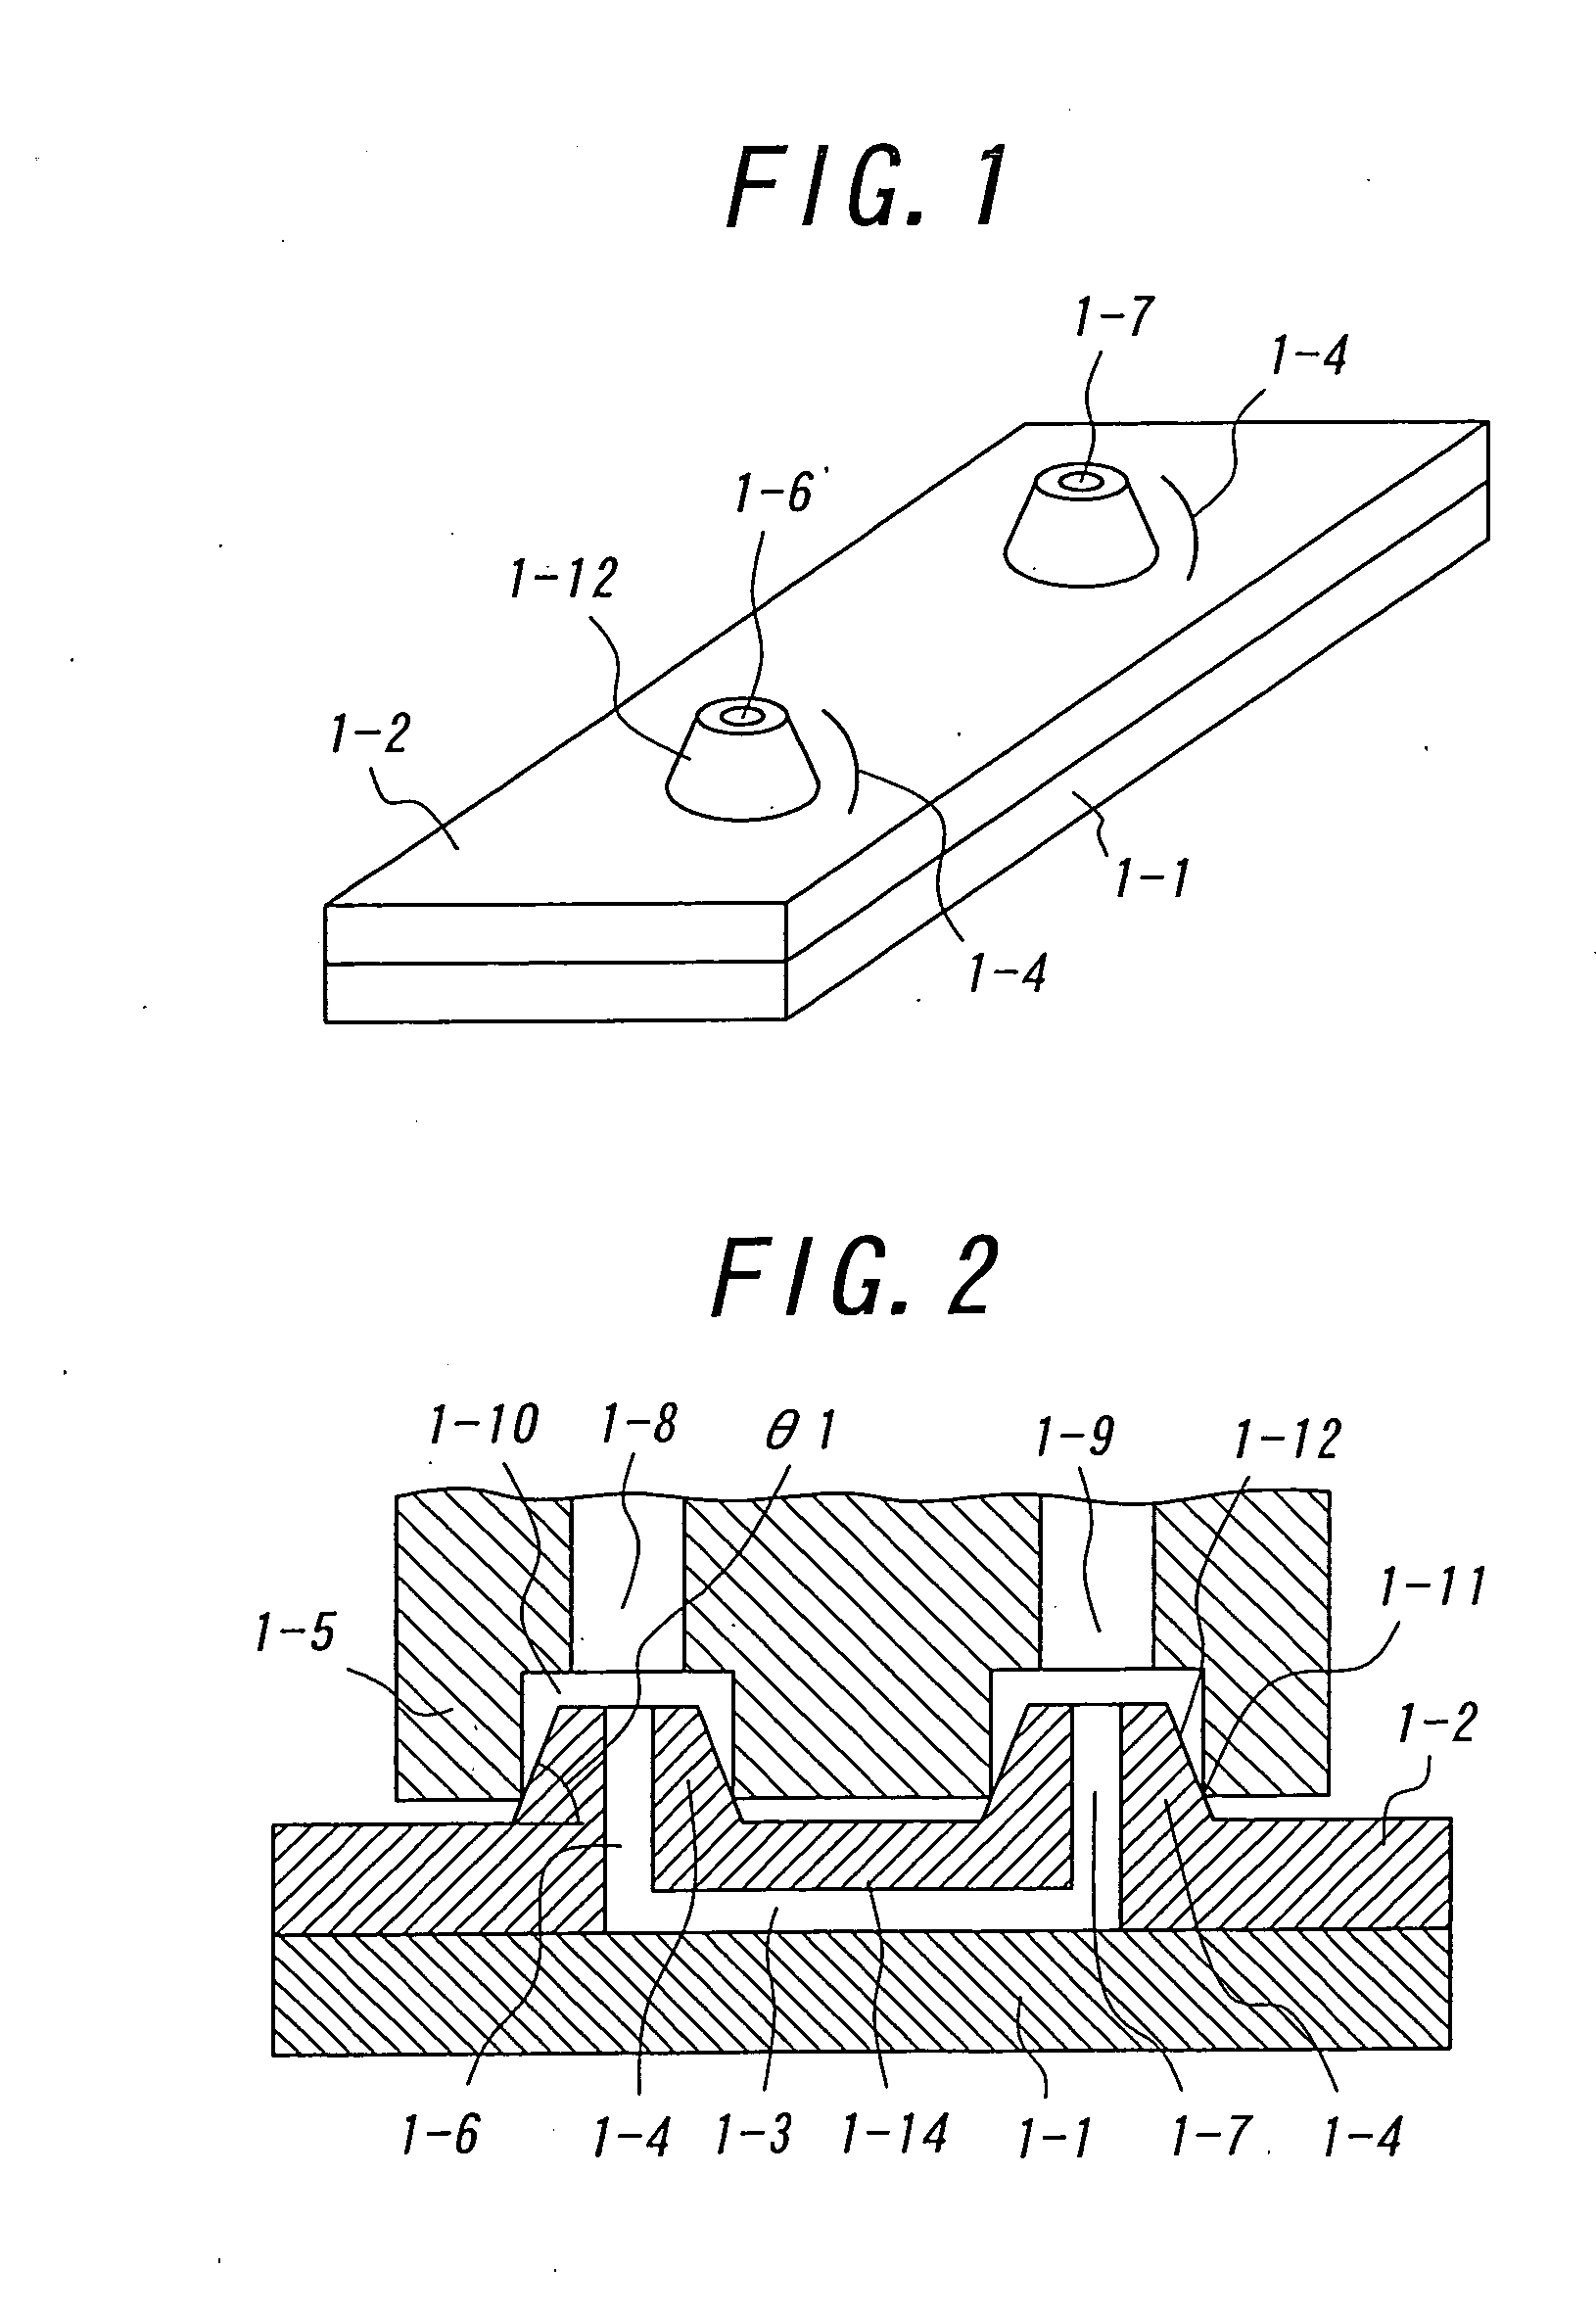 Micro flow passage device, connection device, and method of using the devices